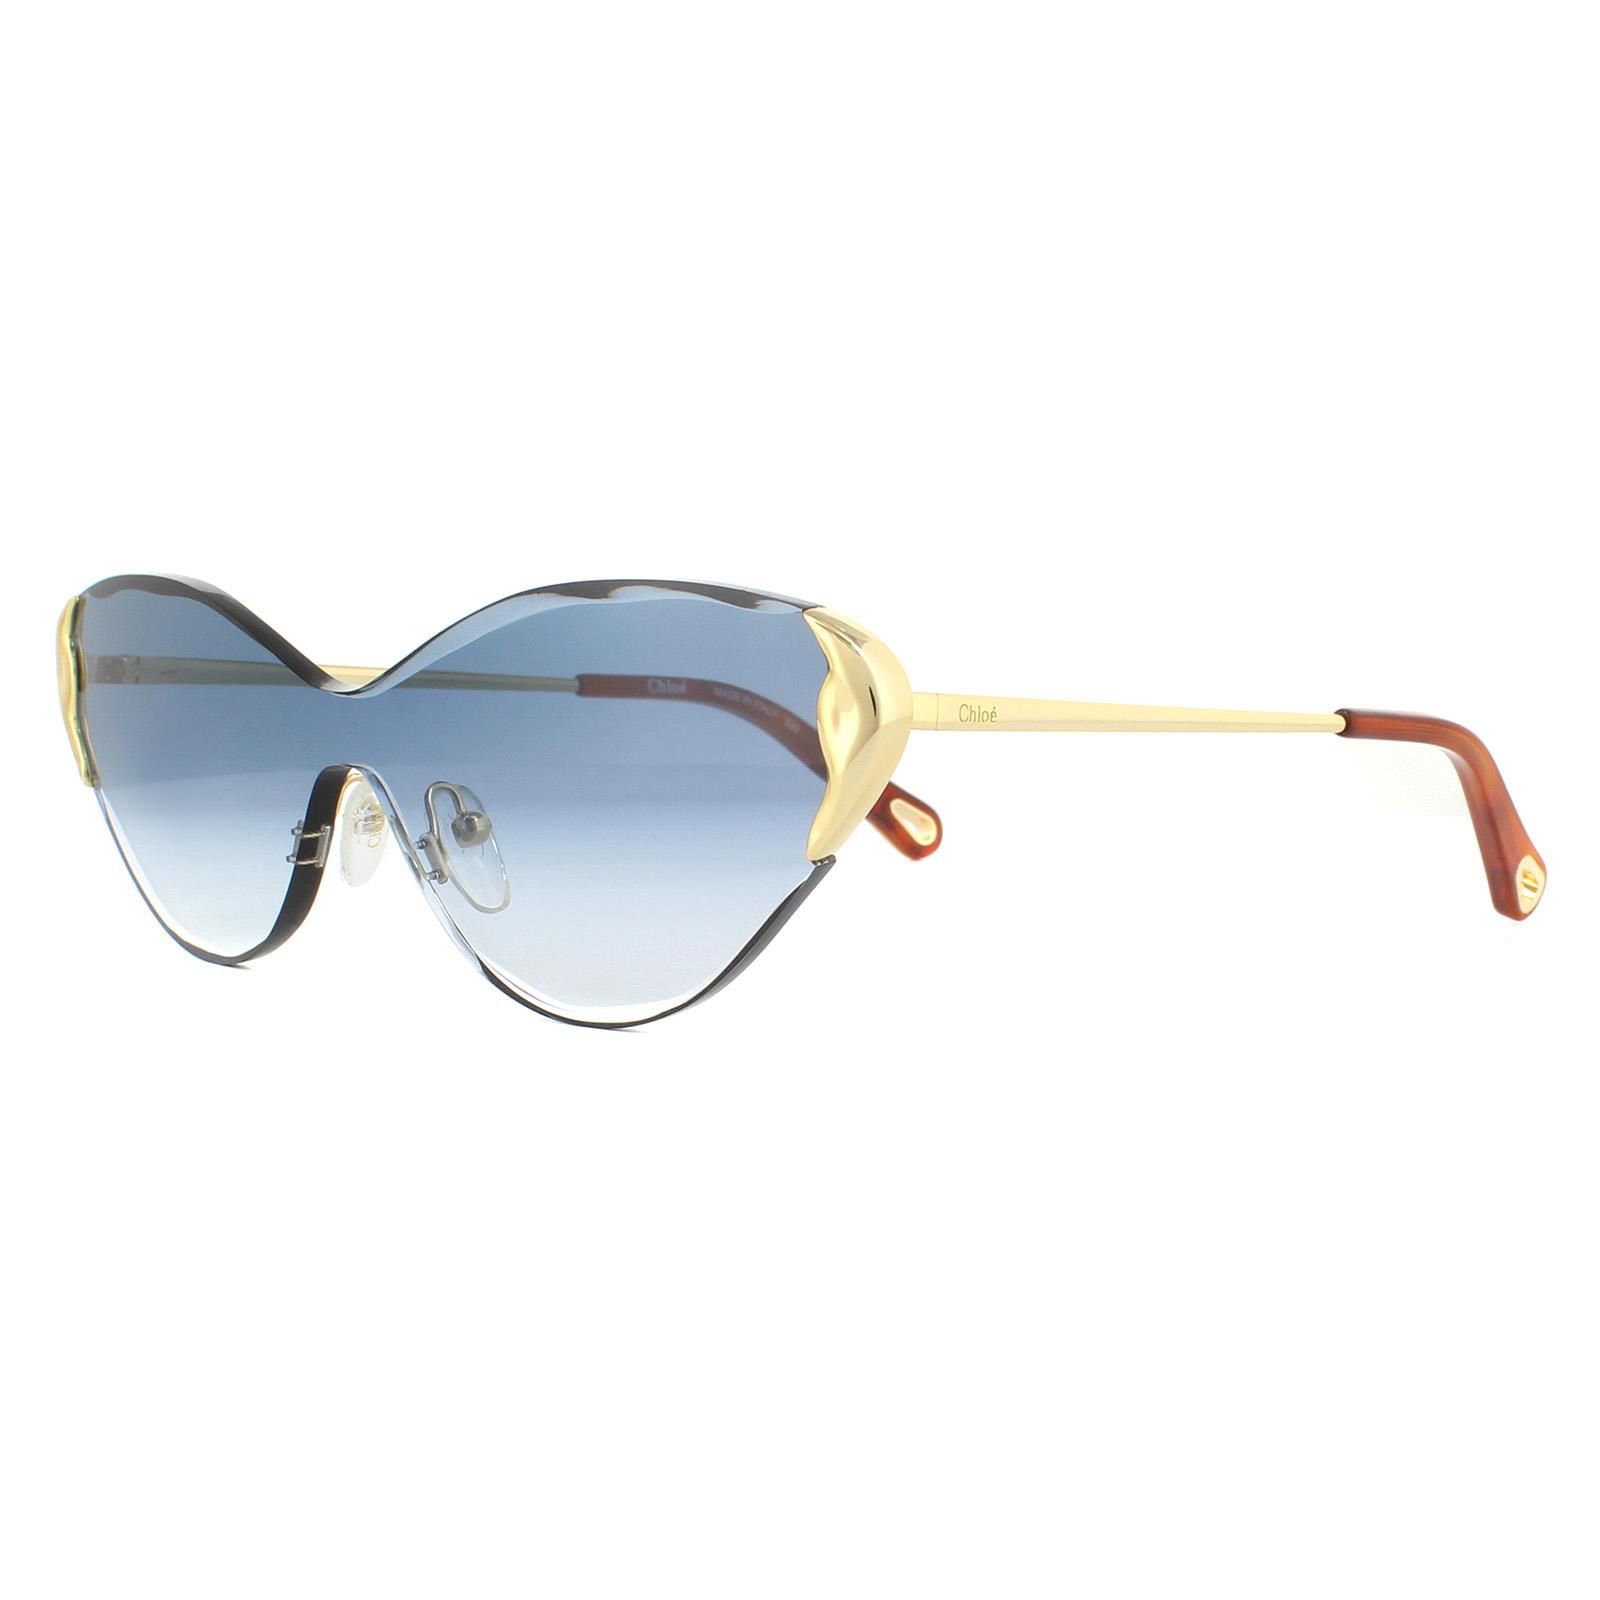 Chloe Sunglasses Curtis CE163S 816 Gold Blue Gradient are a gorgeous wide style with accentuated cat's eye look. The rimless sculptured lens is just stunning and matched perfectly with the metal temples that complete the top corners.